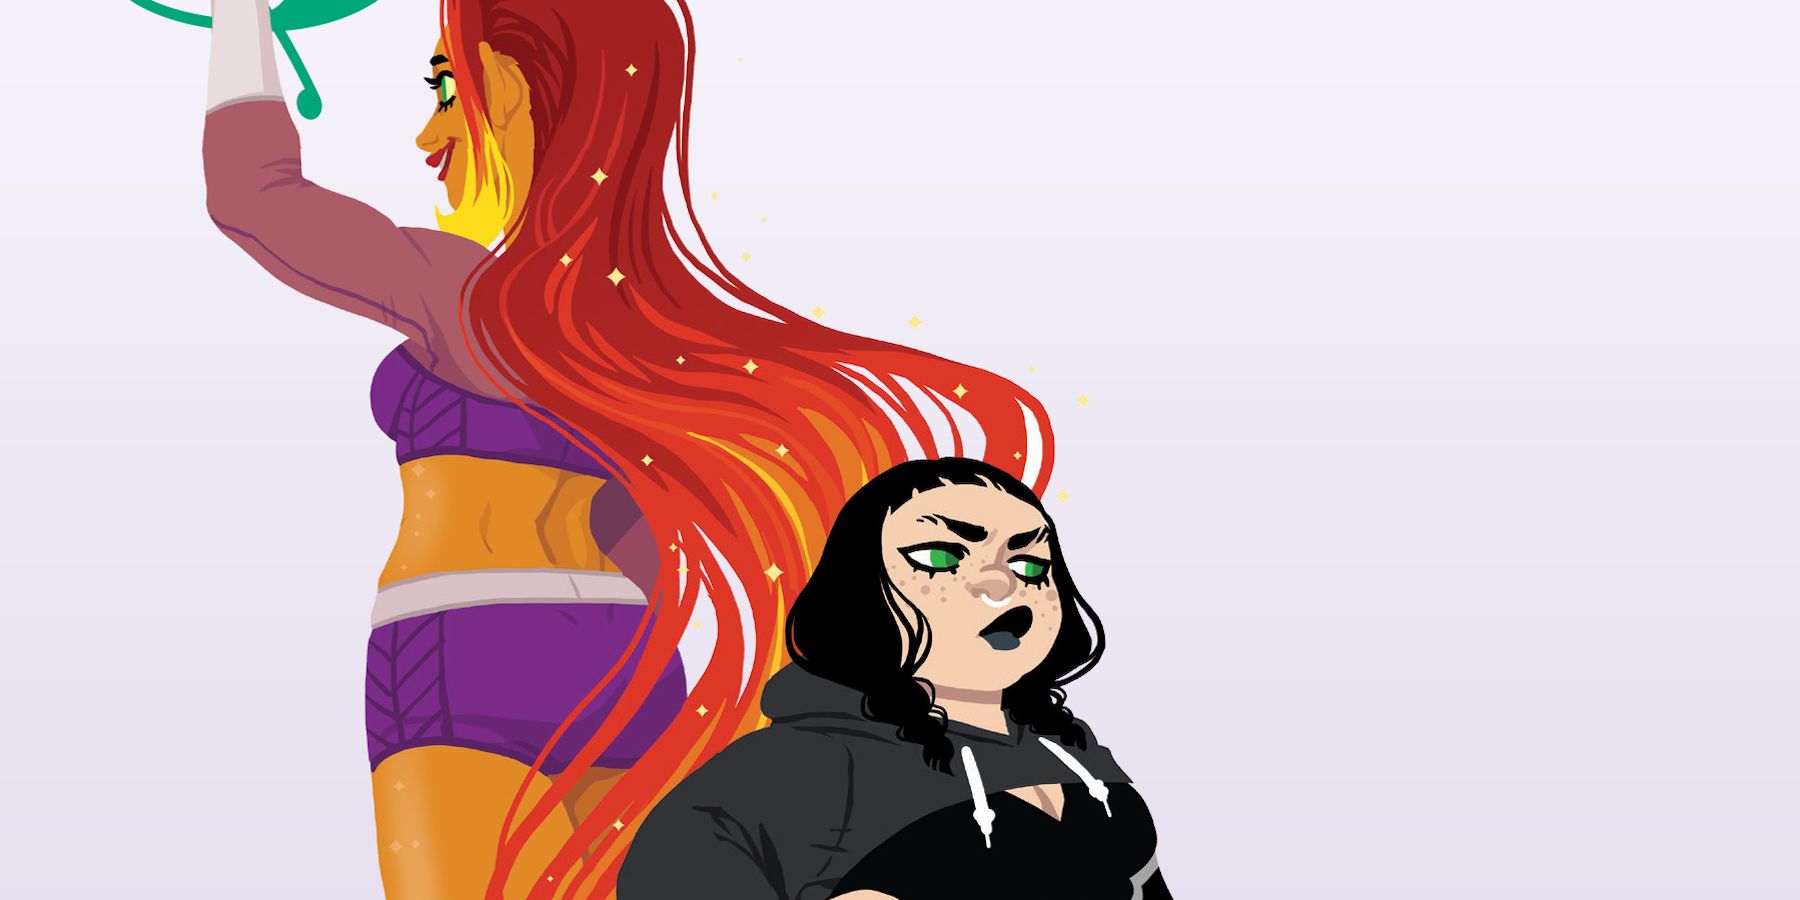 I Am Not Starfire Cover Starfire In The Back Mandy Facing Front